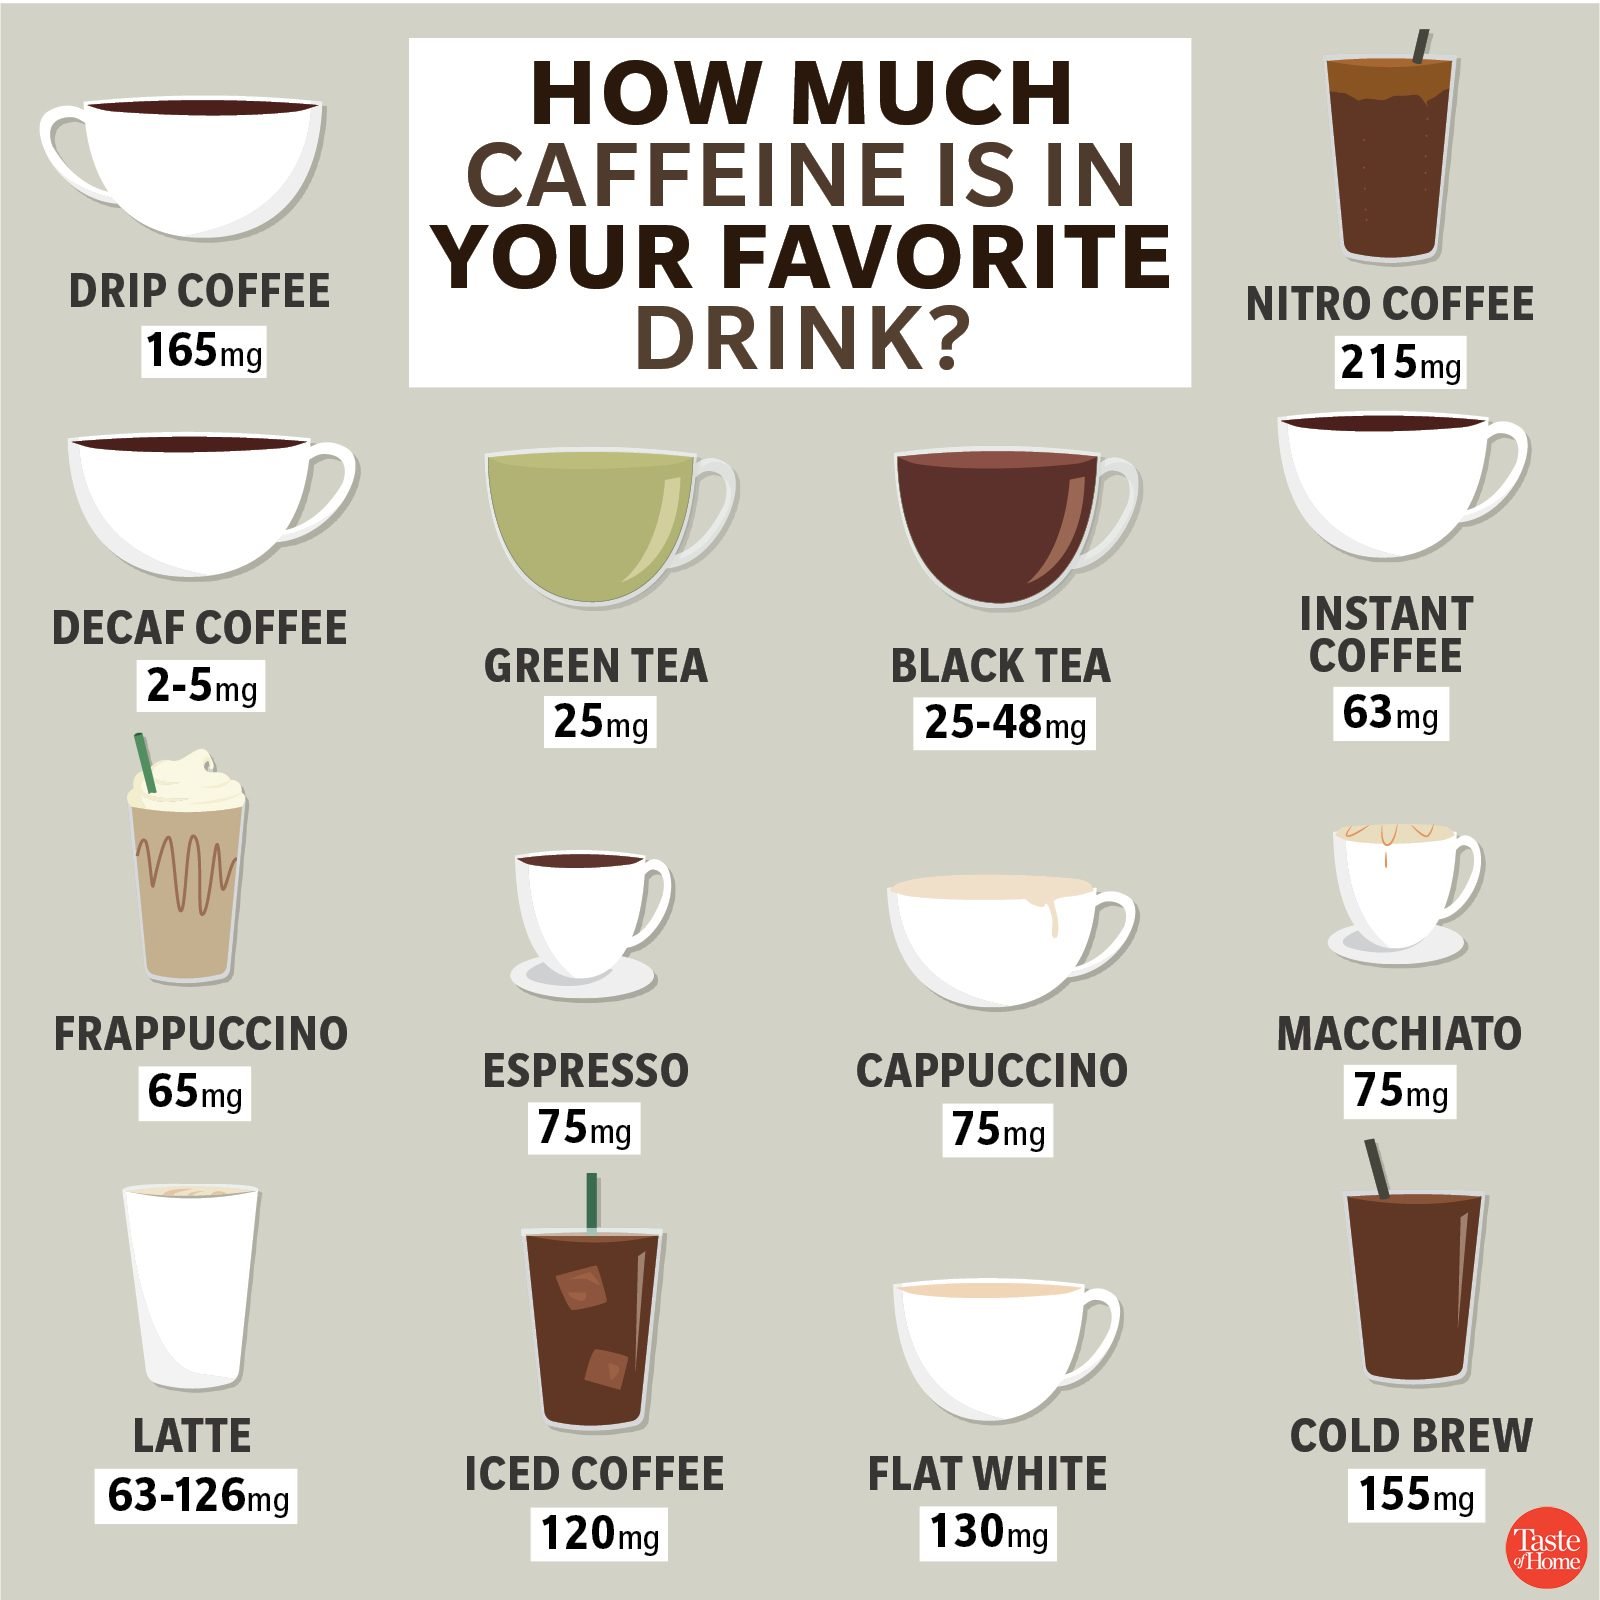 https://www.tasteofhome.com/wp-content/uploads/2020/03/How-much-caffeine-is-in-your-fave-drink.jpg?fit=700%2C700